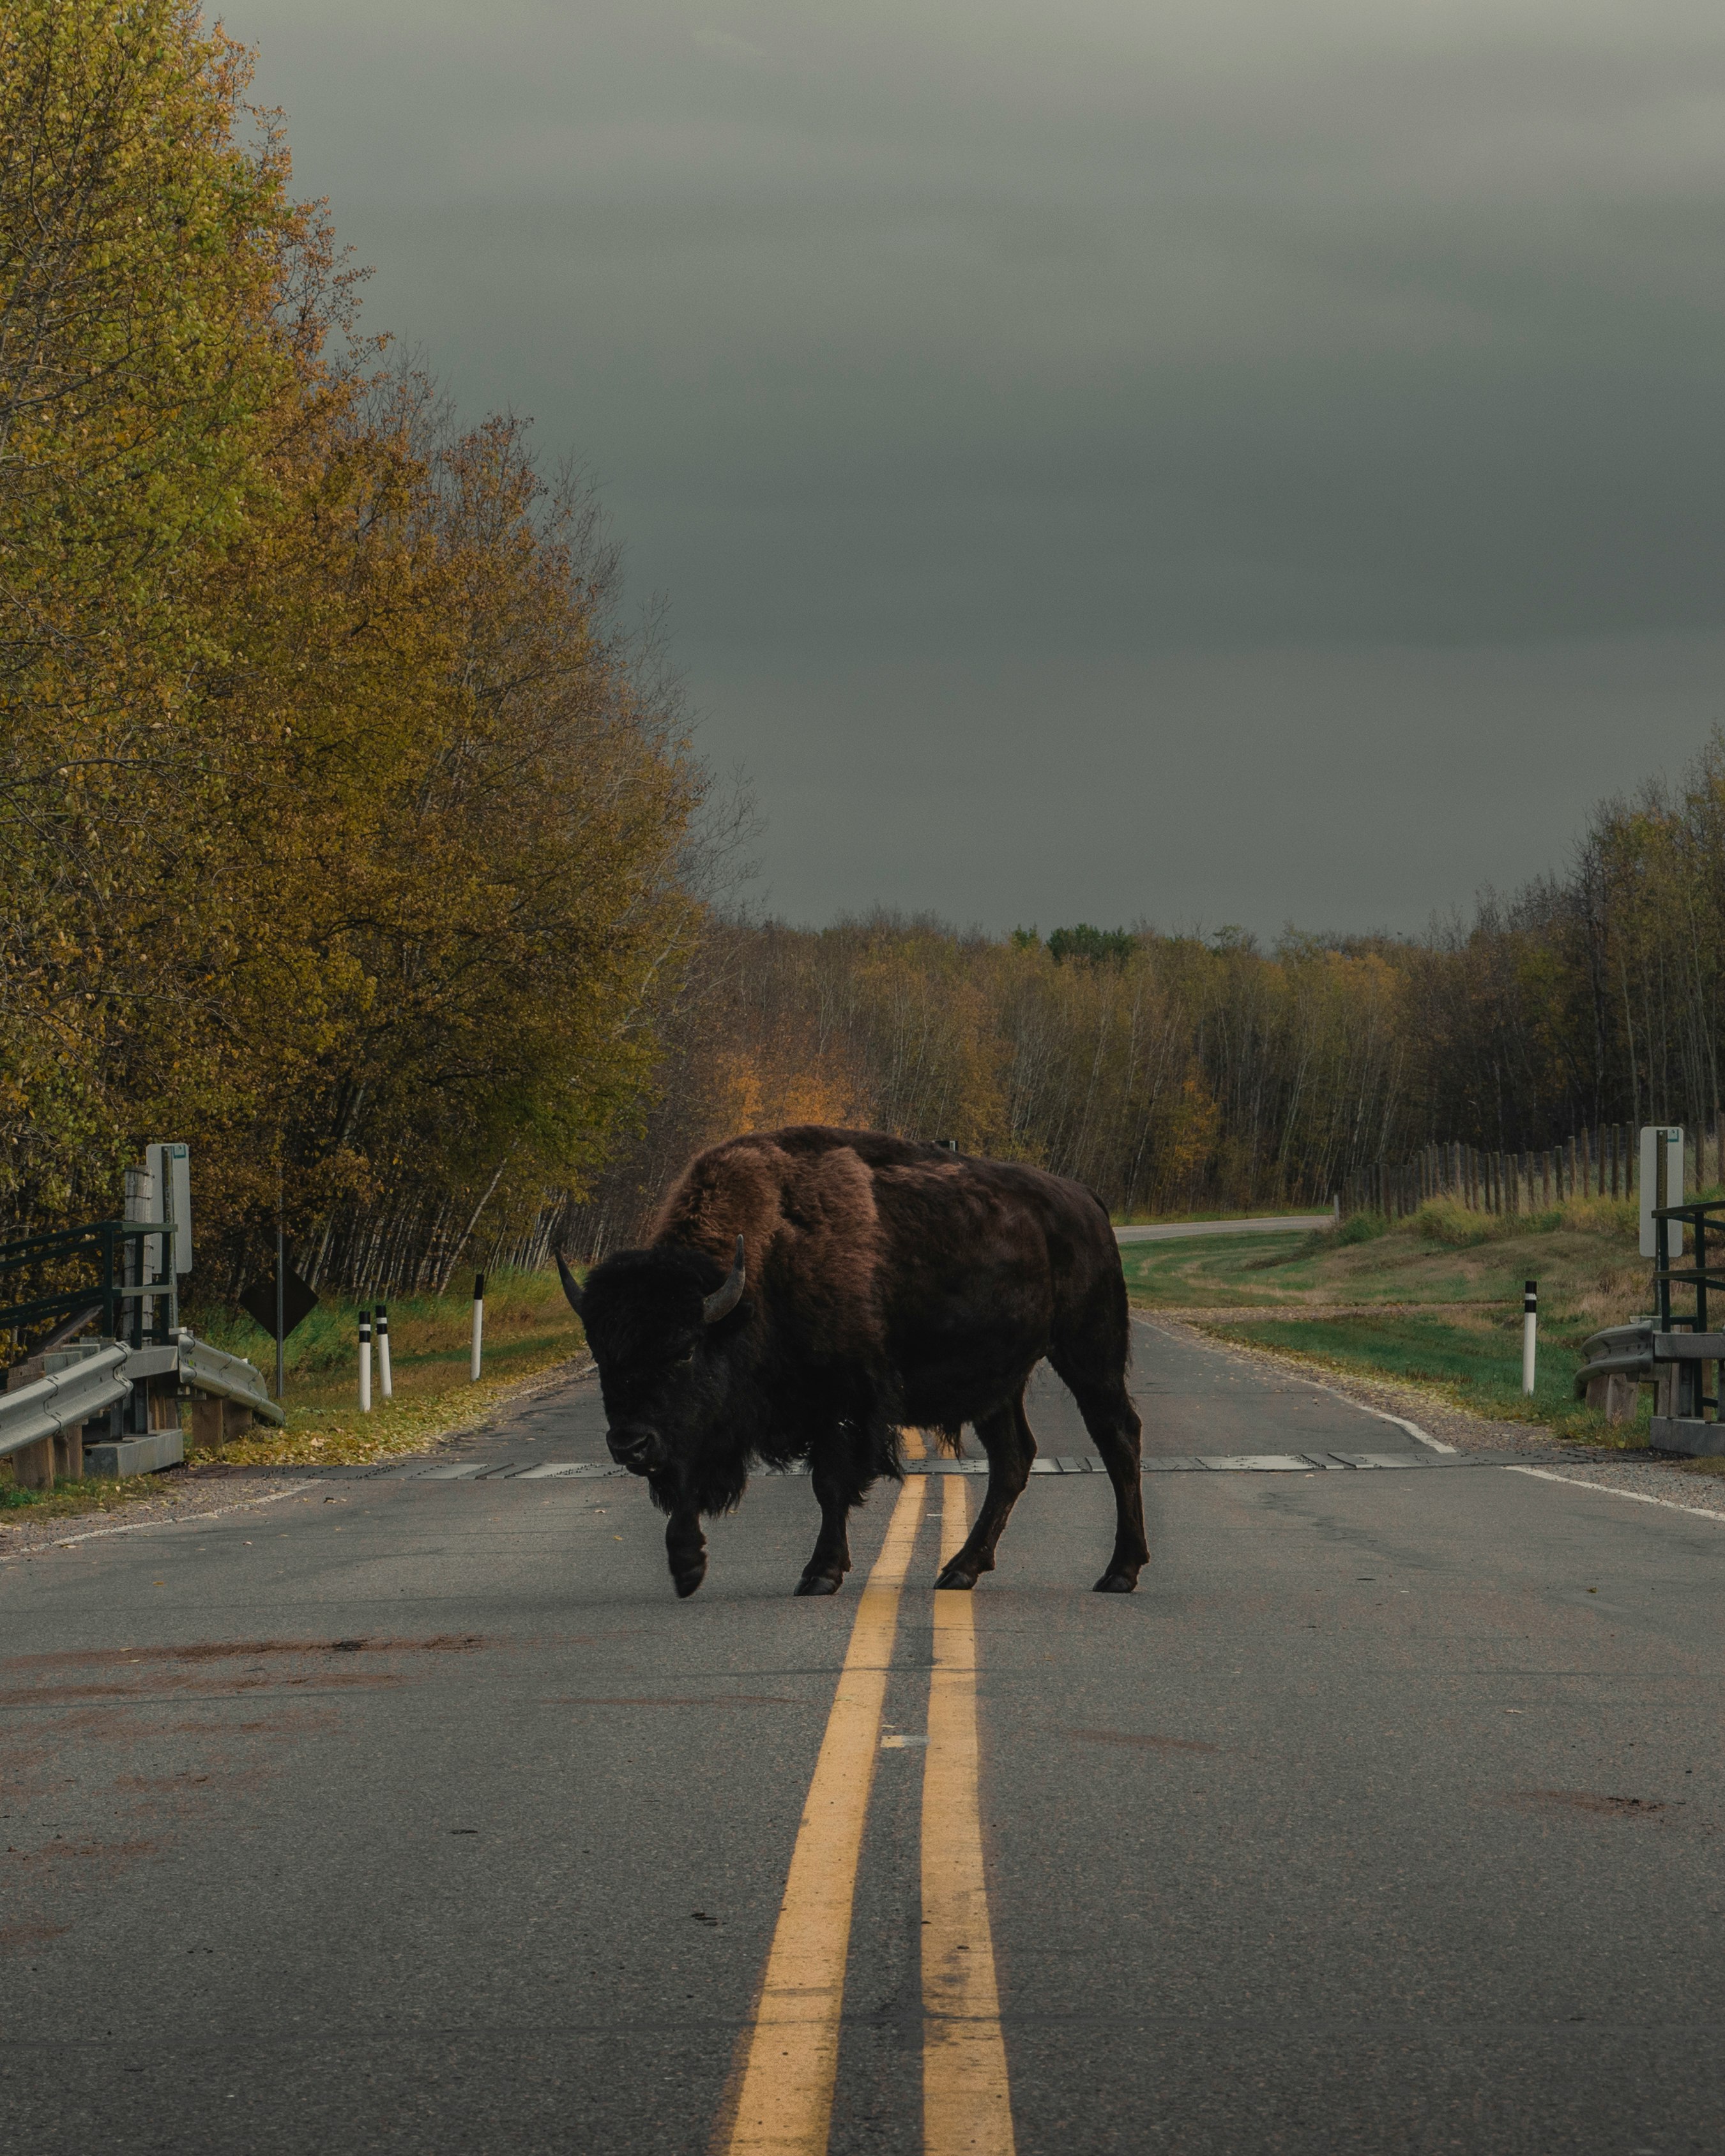 A funny thing you can have the chance to experience at the Elk Island National Park.